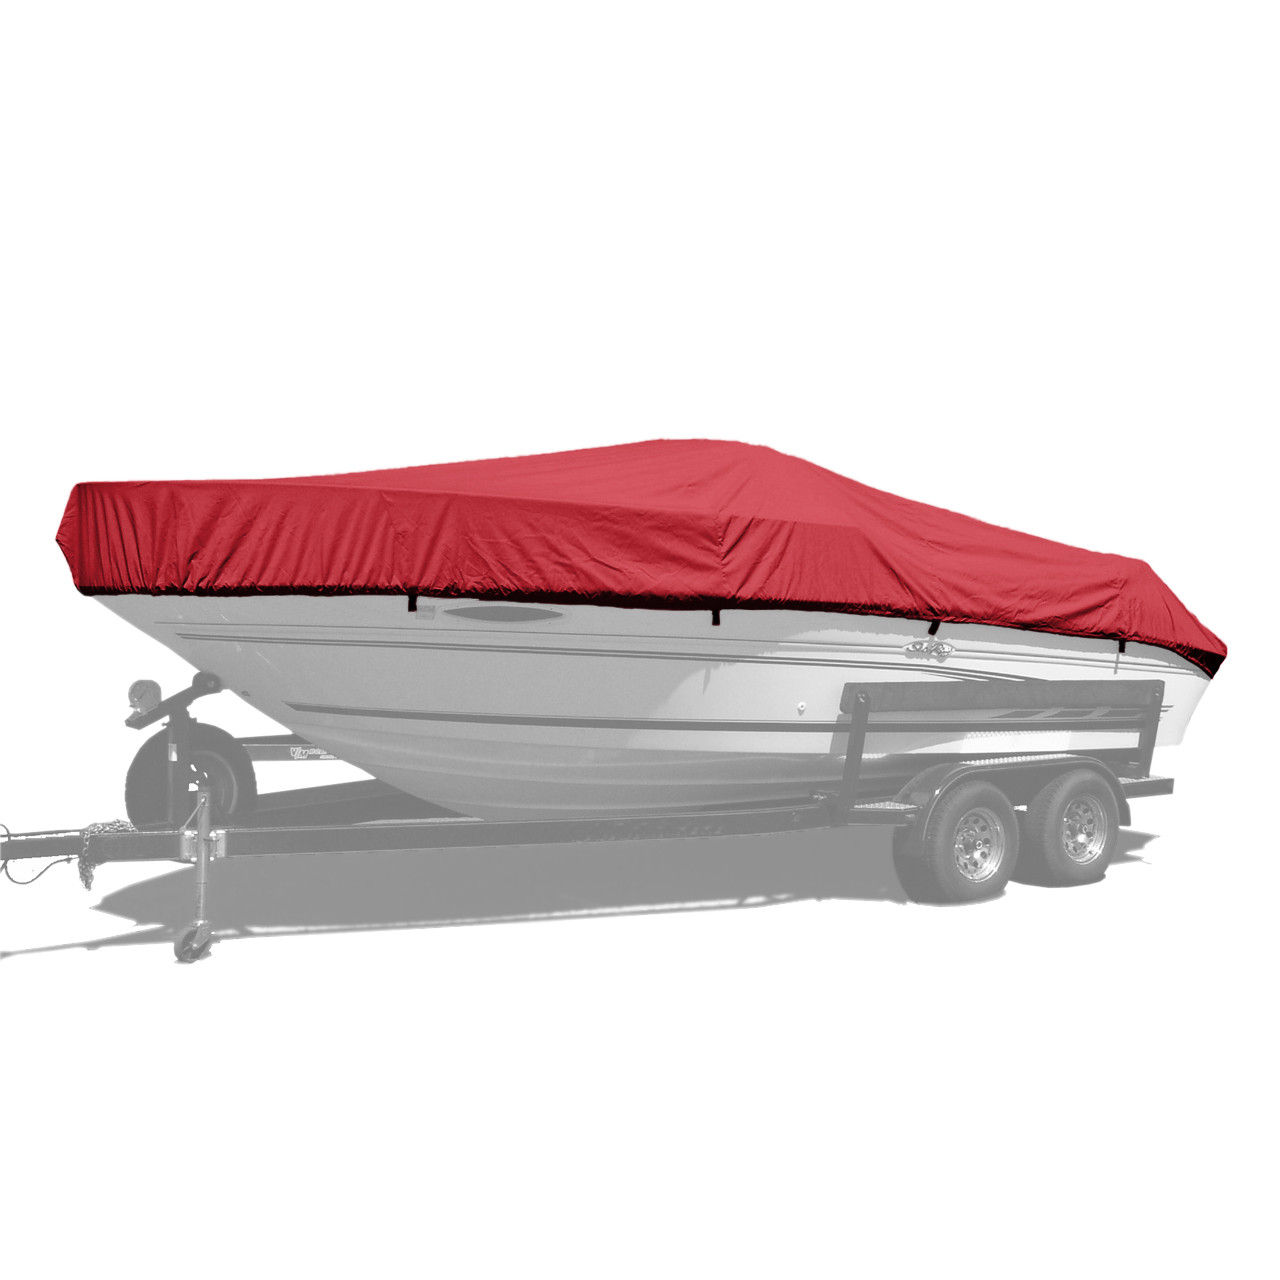 TAHOE® Boat Covers